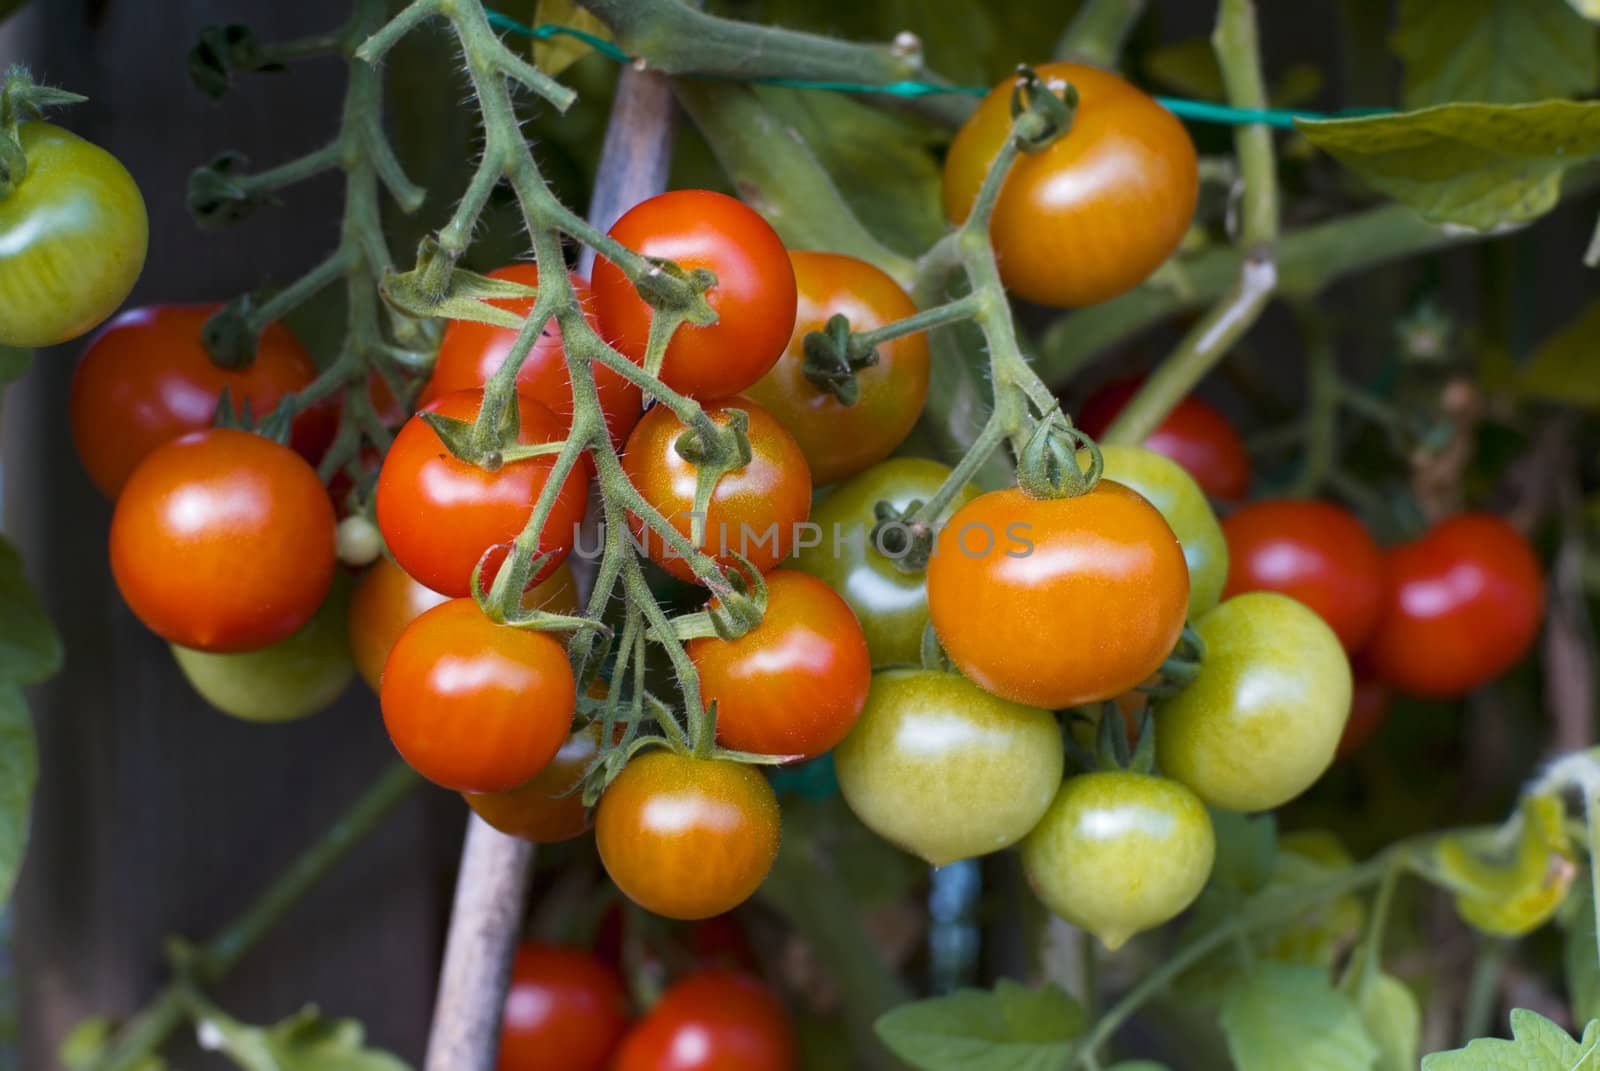 Lots of growing cherry tomatoes, still hanging in the plant.